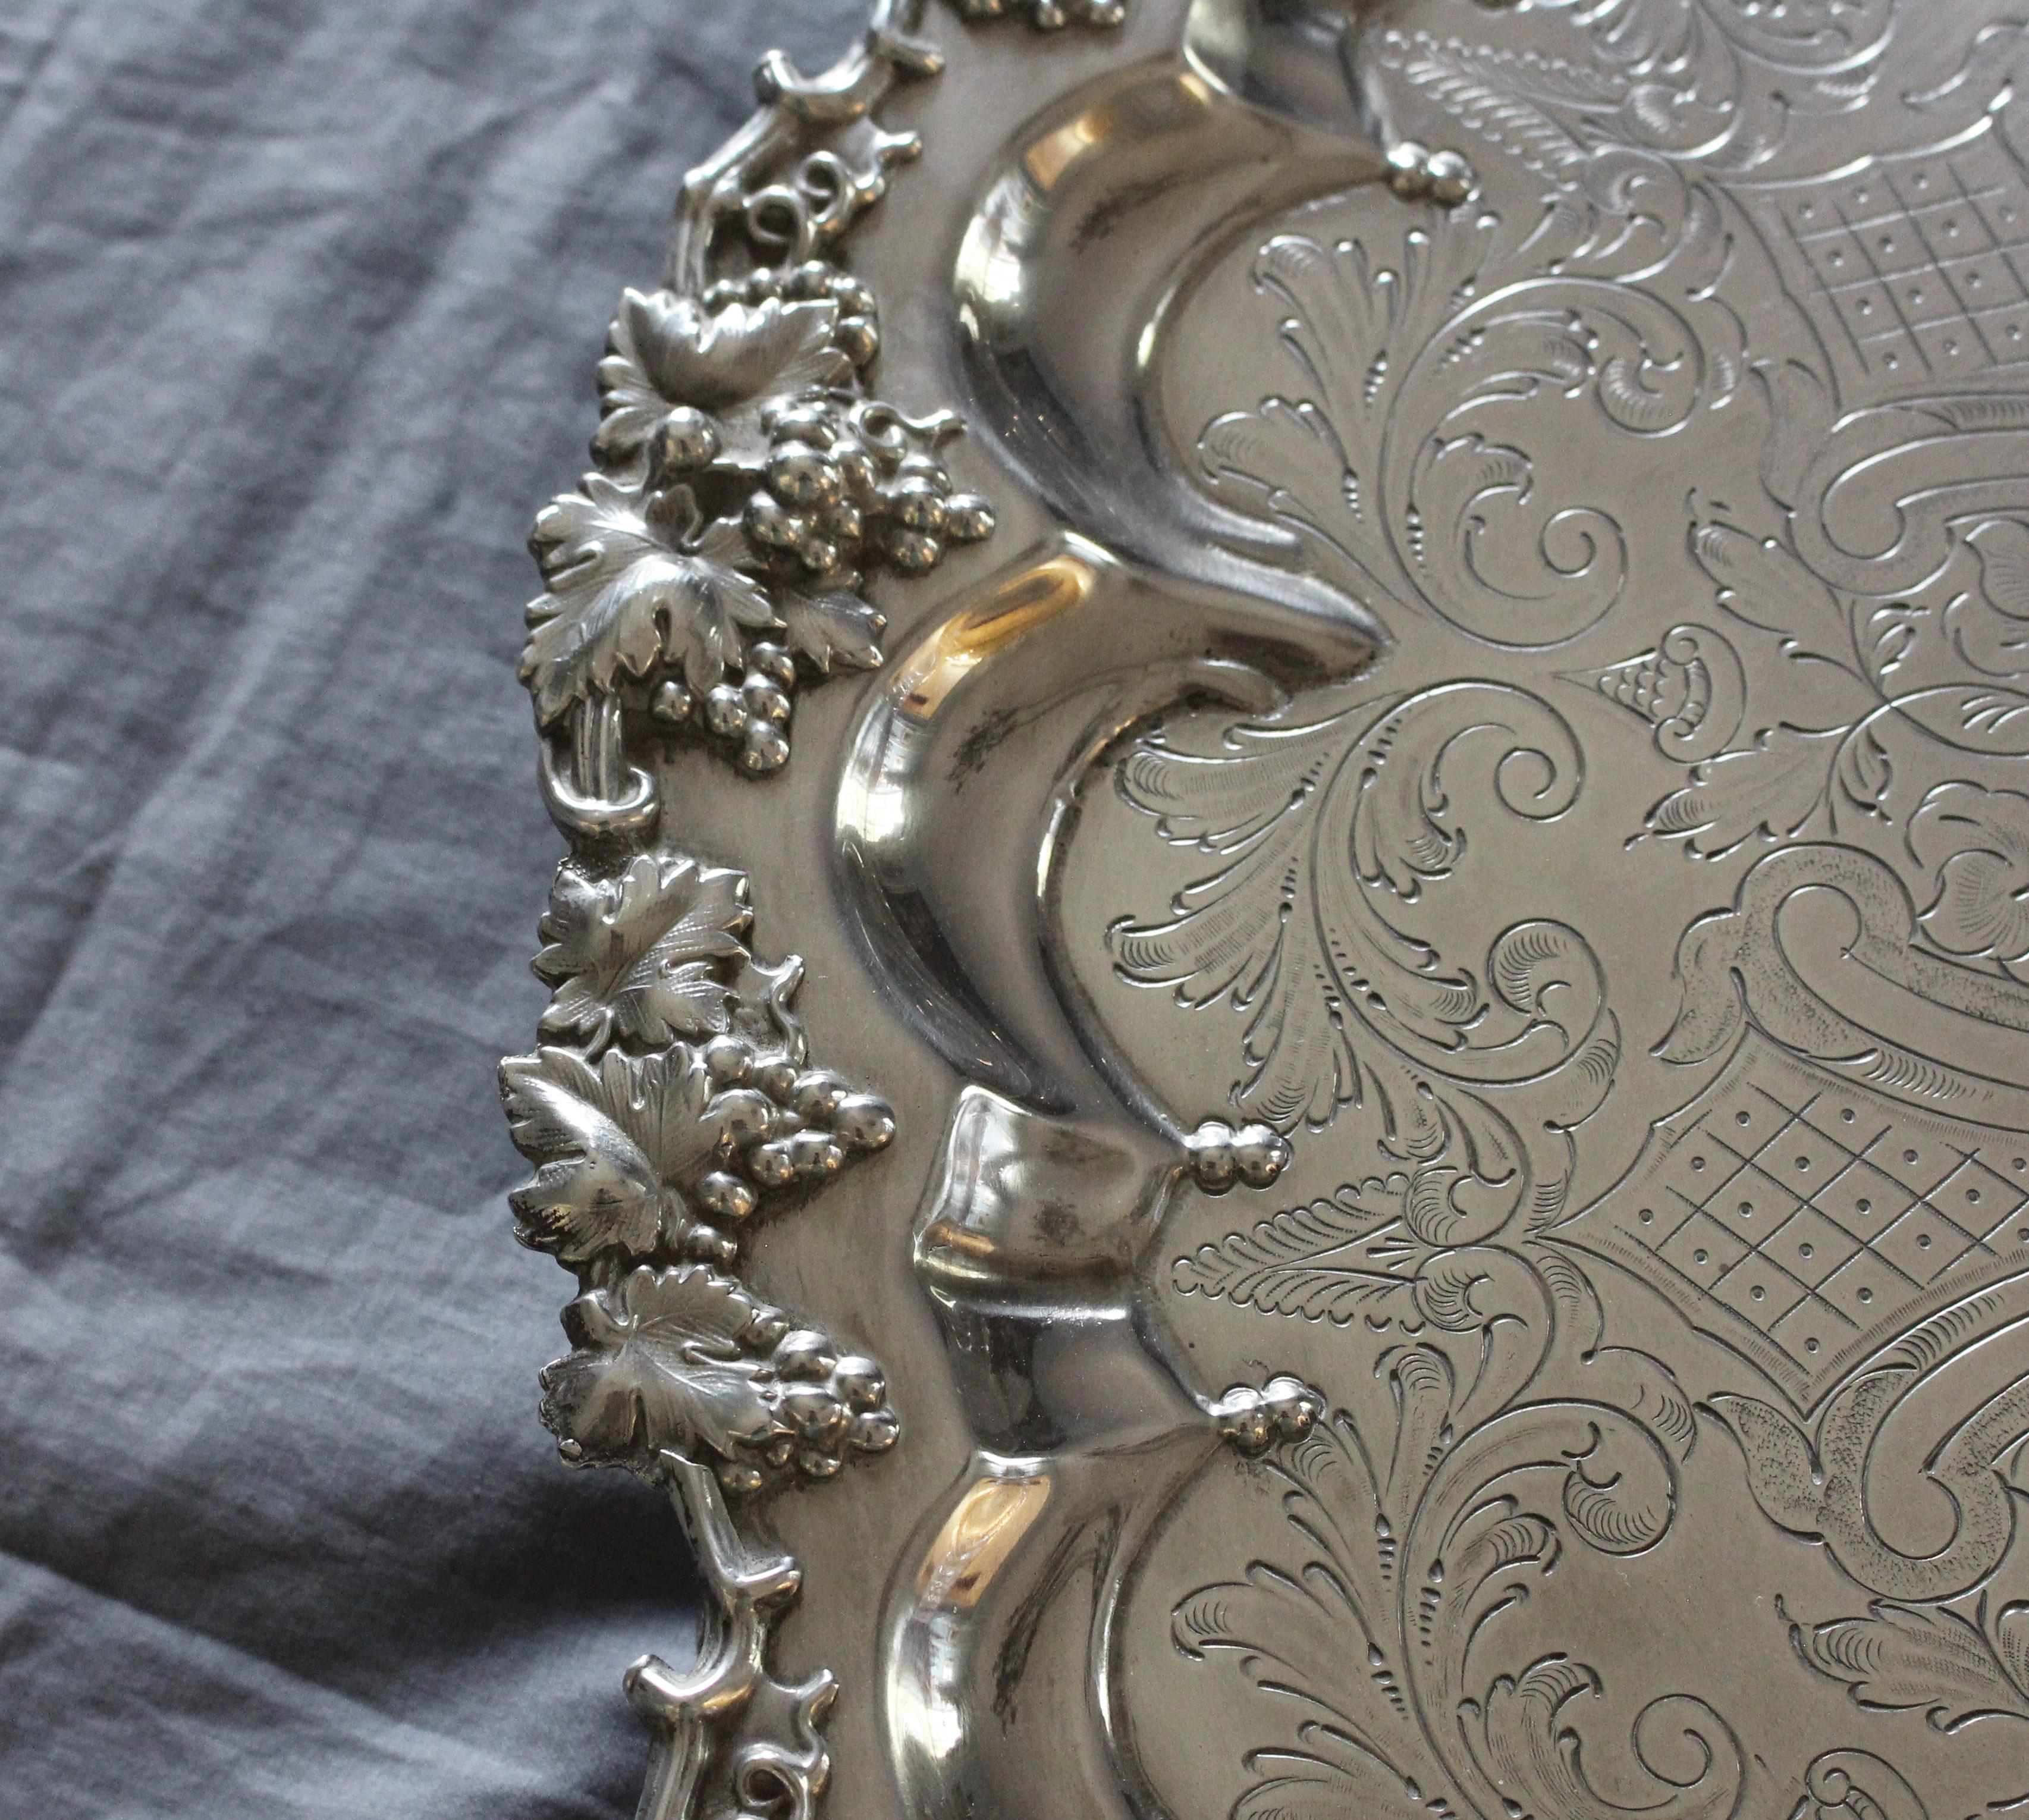 c. 1920 Electroplated Nickel Silver Salver by S.B. & Co. In Good Condition For Sale In Chapel Hill, NC